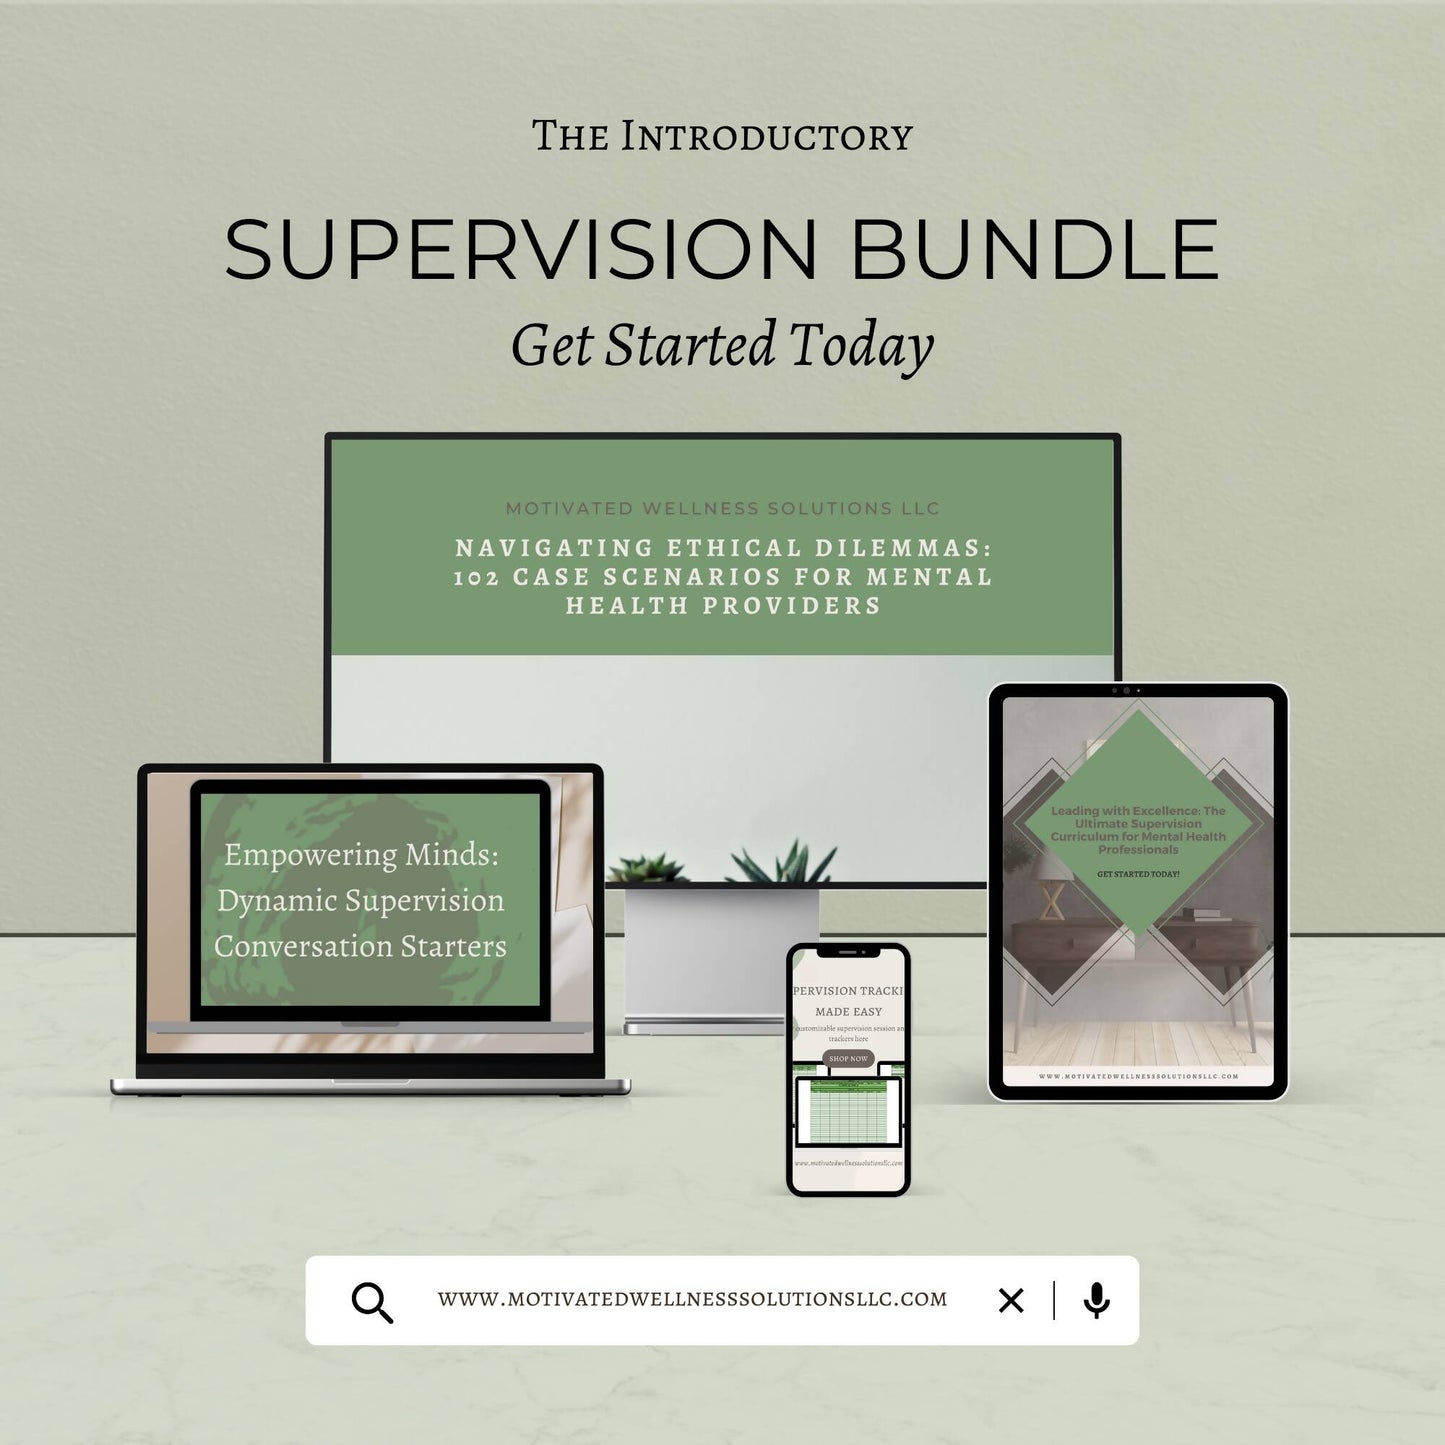 Welcome to the Introductory Supervision Bundle for Mental Health Professionals